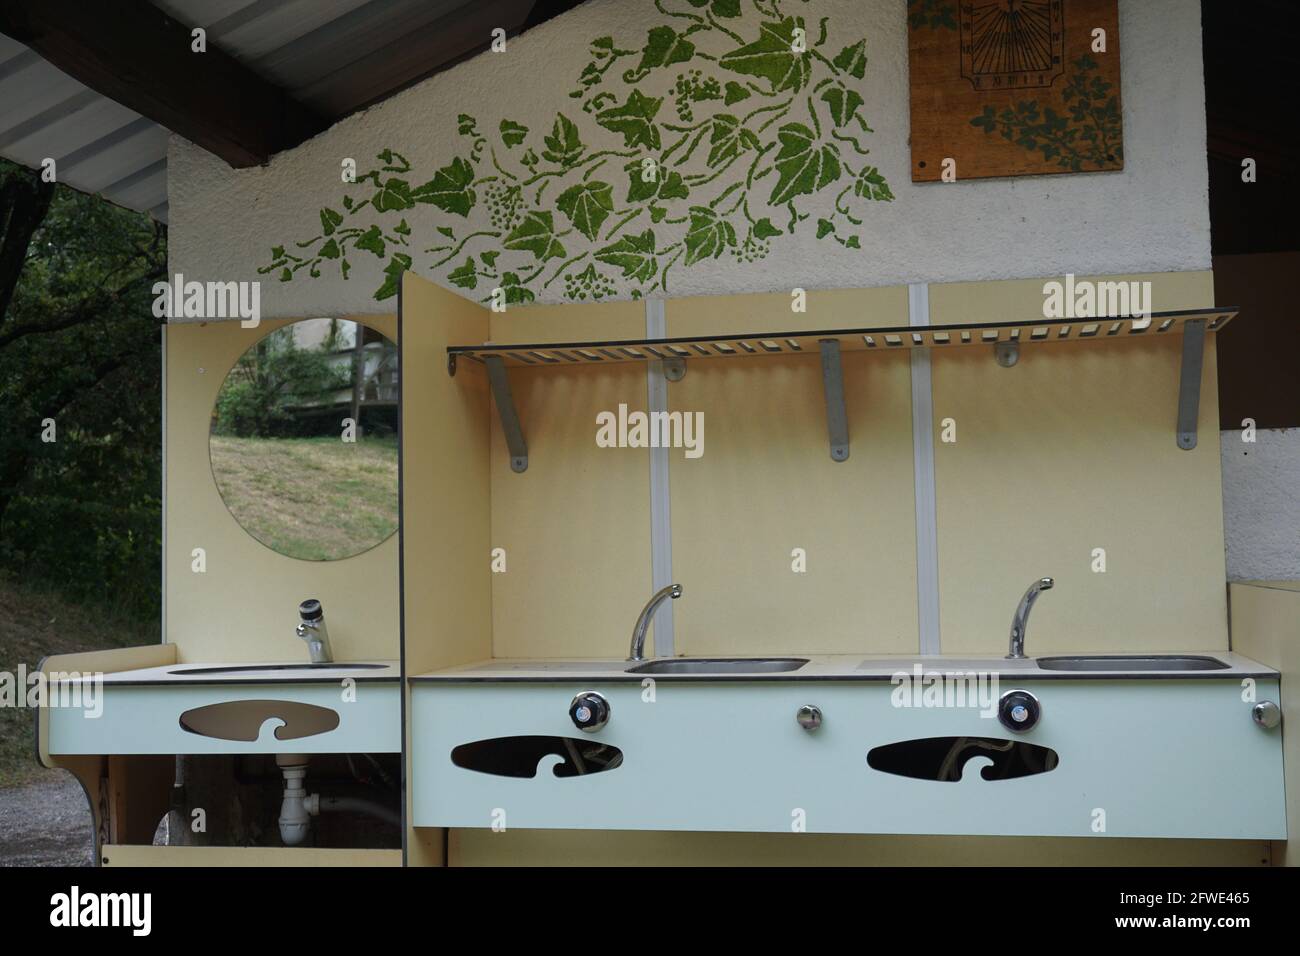 outdoor bathroom and sinks with a painting of leaves on the wall at a camping Stock Photo